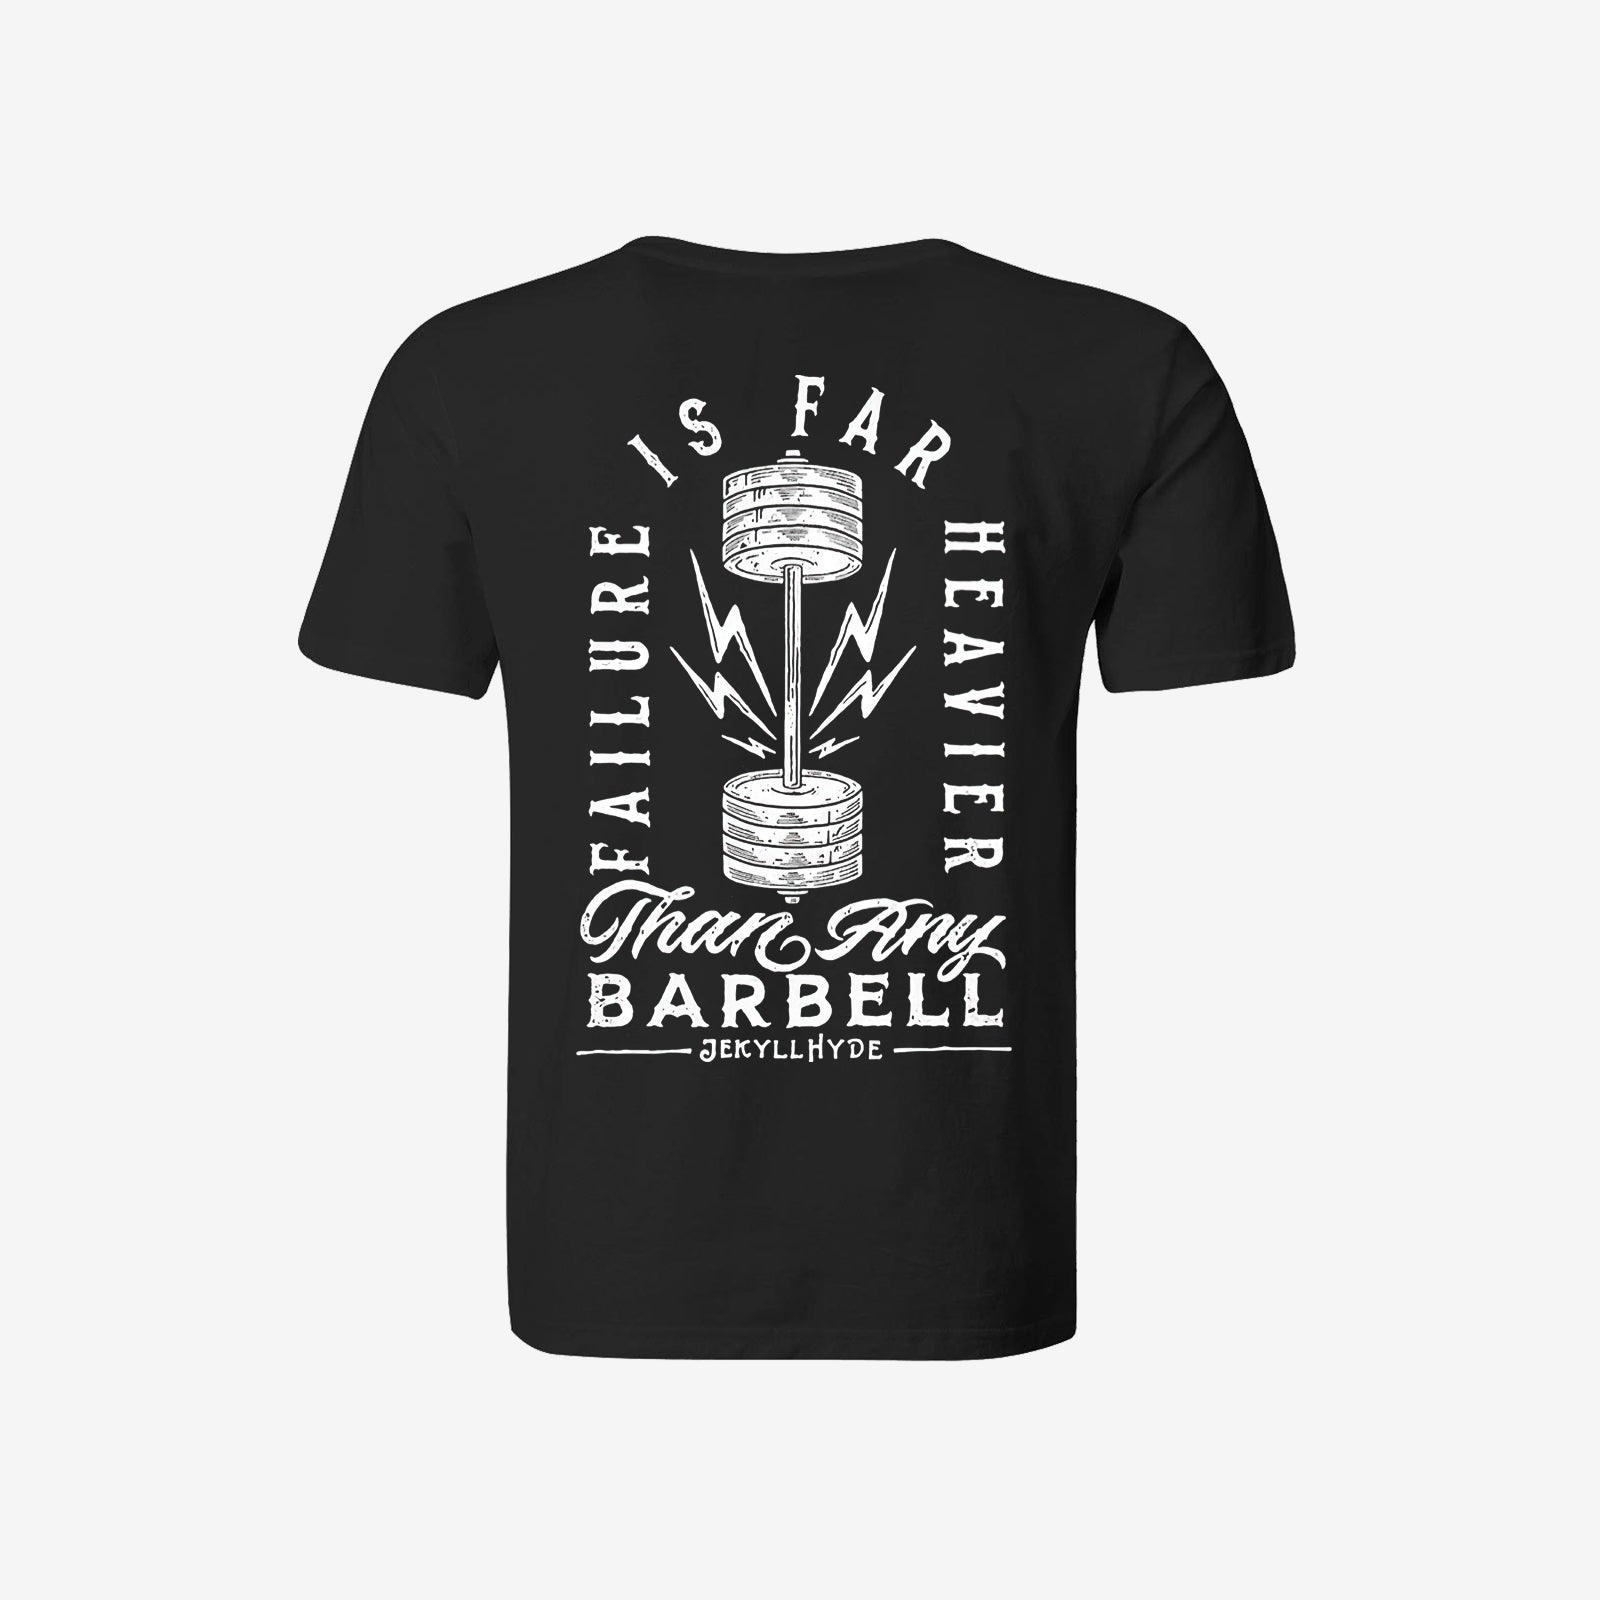 Livereid Barbell Letter Print Casual T-Shirt - chicyea